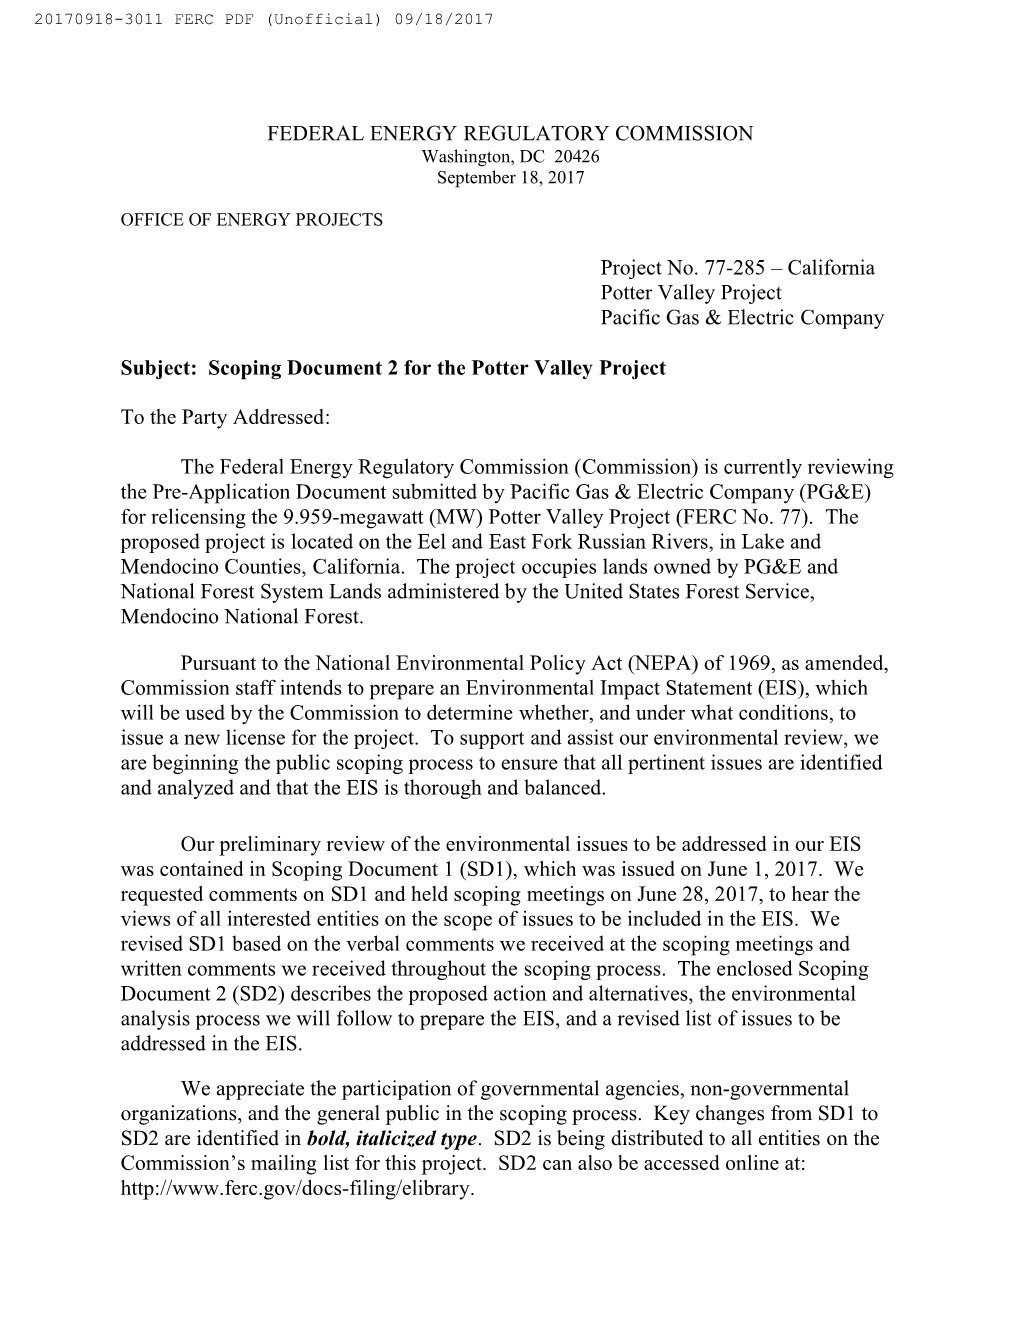 FEDERAL ENERGY REGULATORY COMMISSION Project No. 77-285 – California Potter Valley Project Pacific Gas & Electric Company